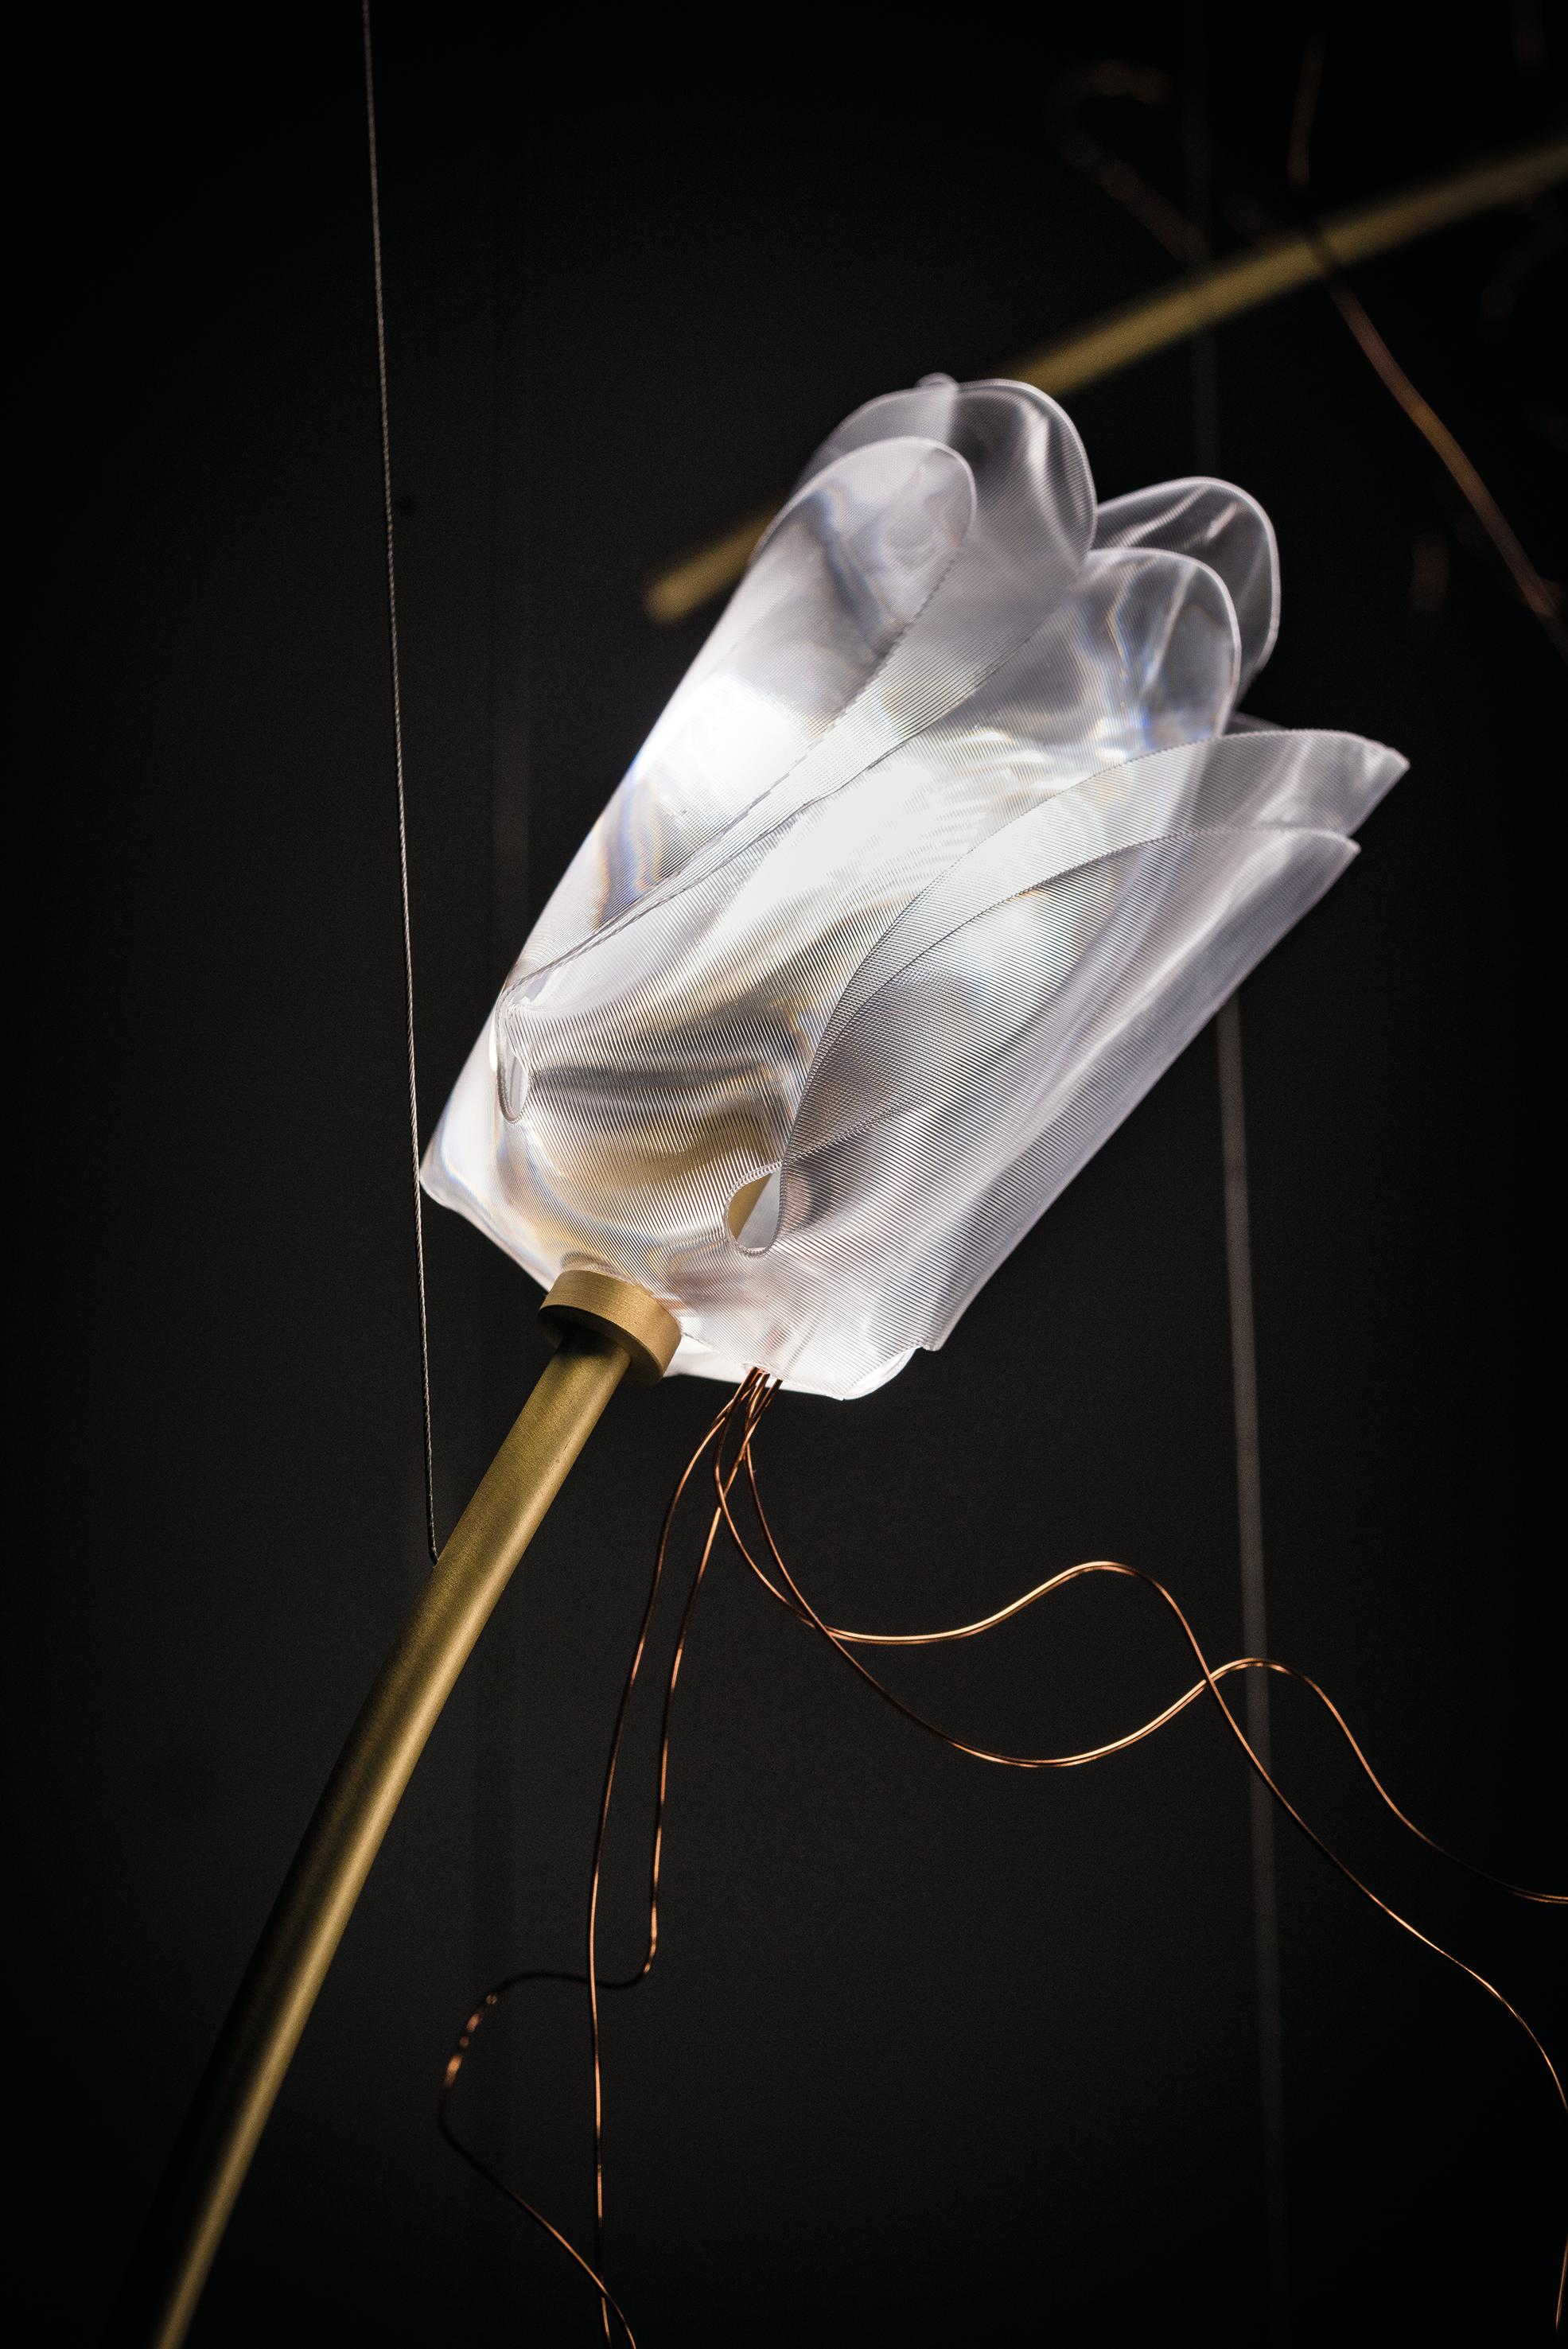 Imaginative, elegant, weightless. Tulip literally adorns spaces with floating blossoms that have been hand molded according to Slamp’s methods, making each unique. The almost invisible cables hold the suspended flowers that bloom from brushed brass